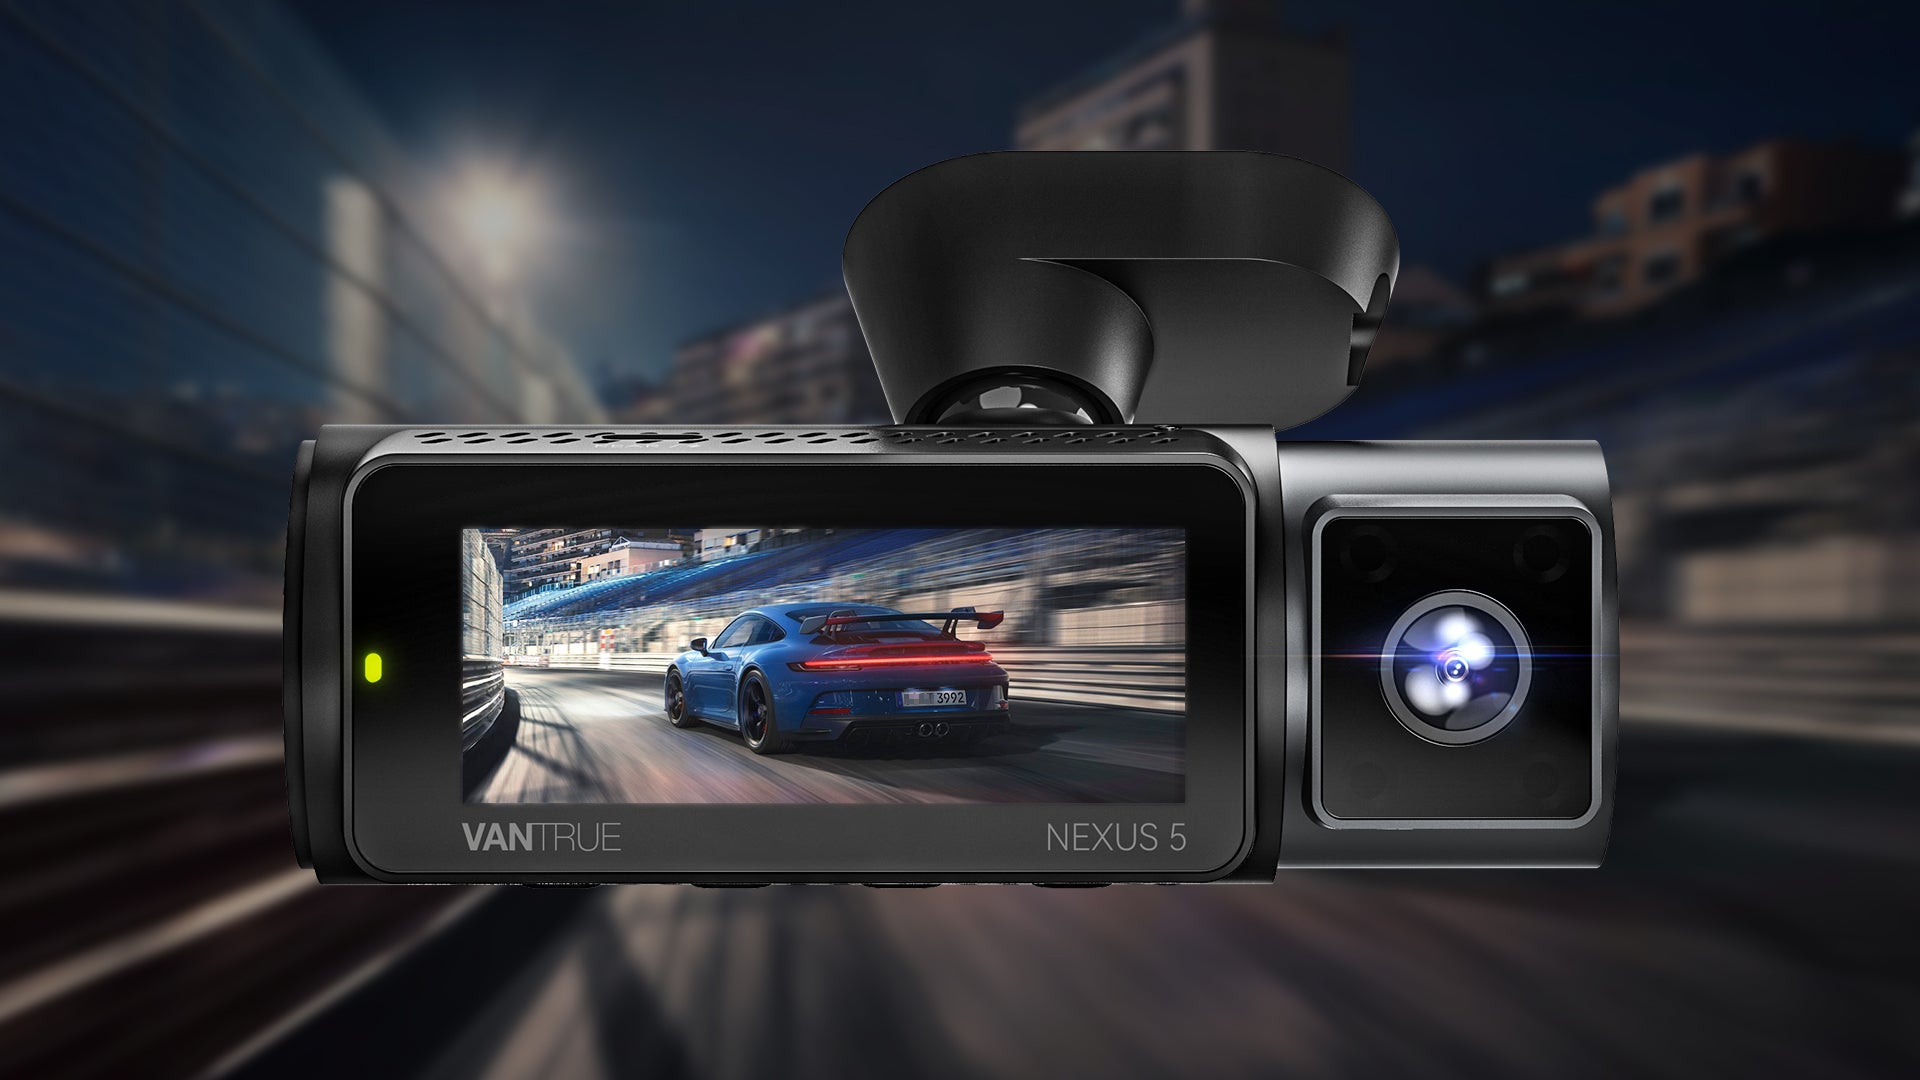 Night Vision in Dash Cams - Why is it Important? – Vantrue